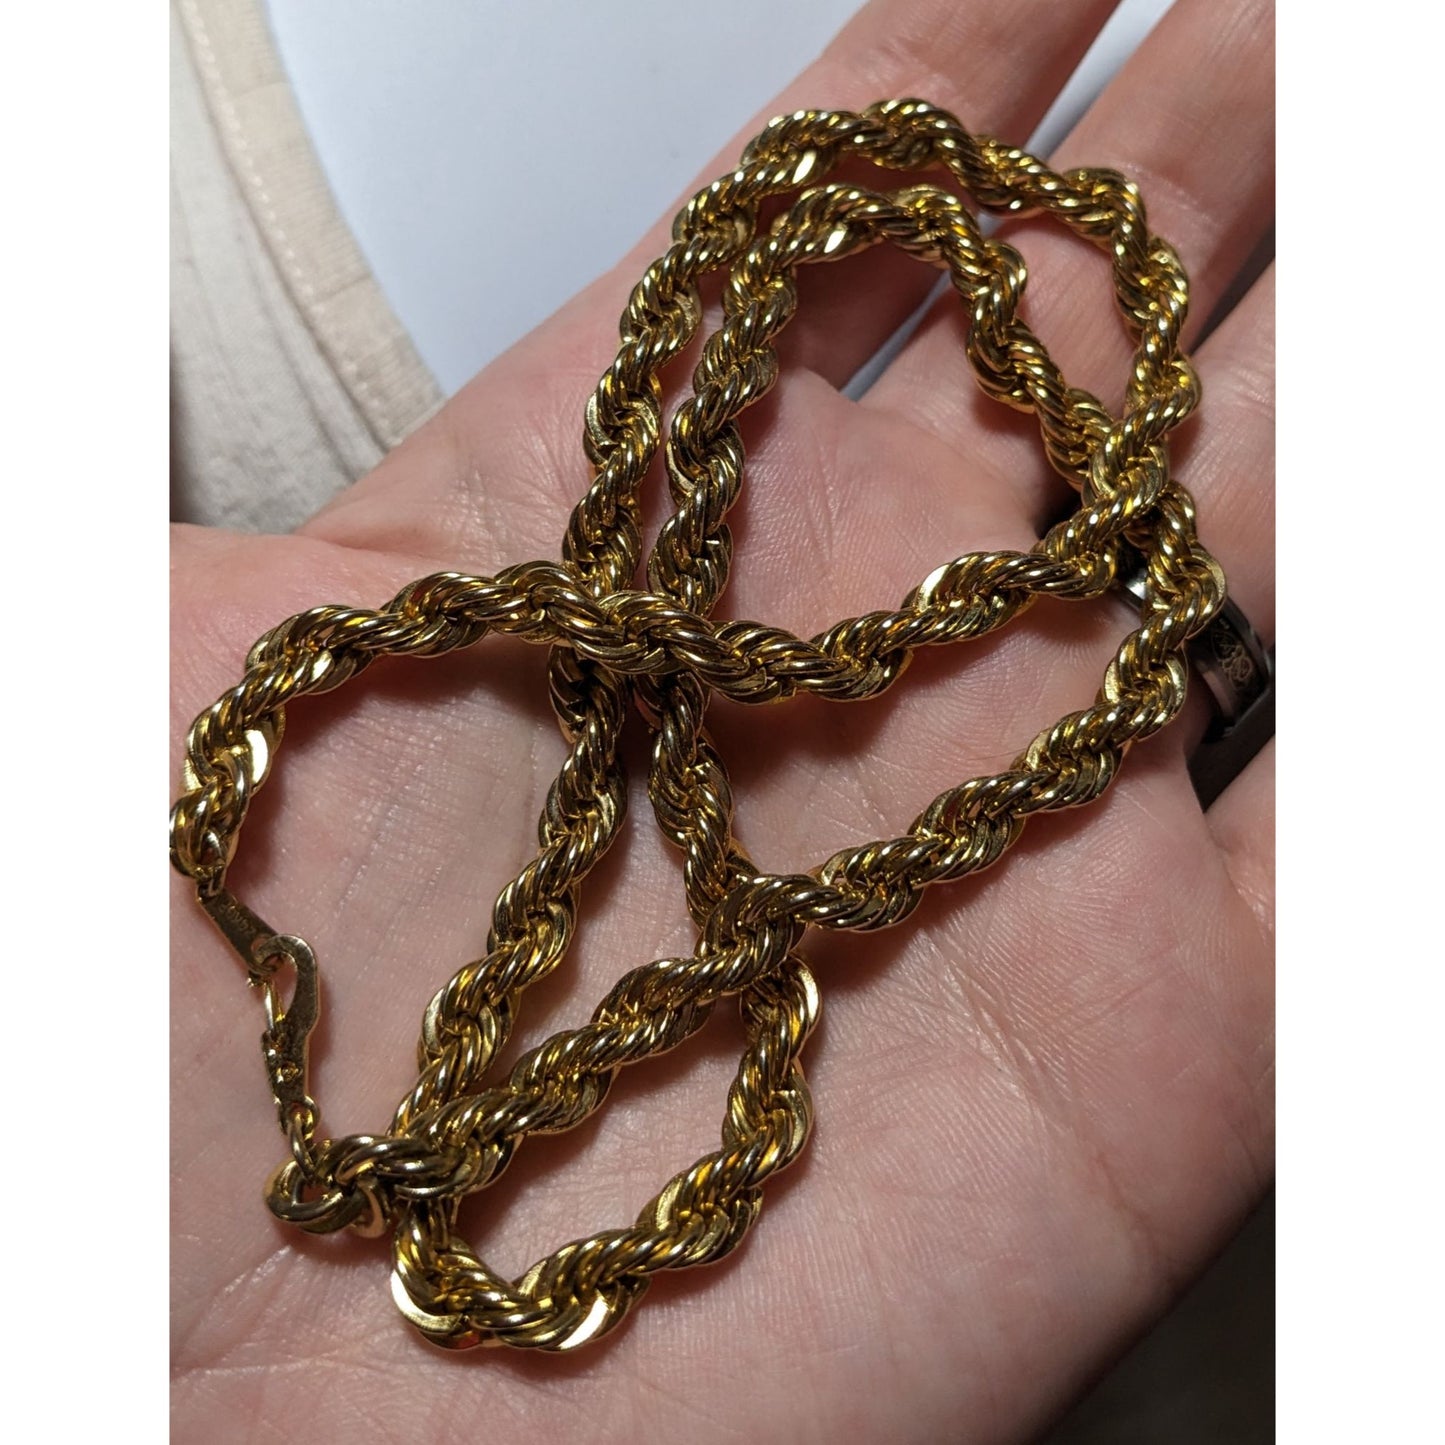 24K Gold Plated Rope Chain Necklace